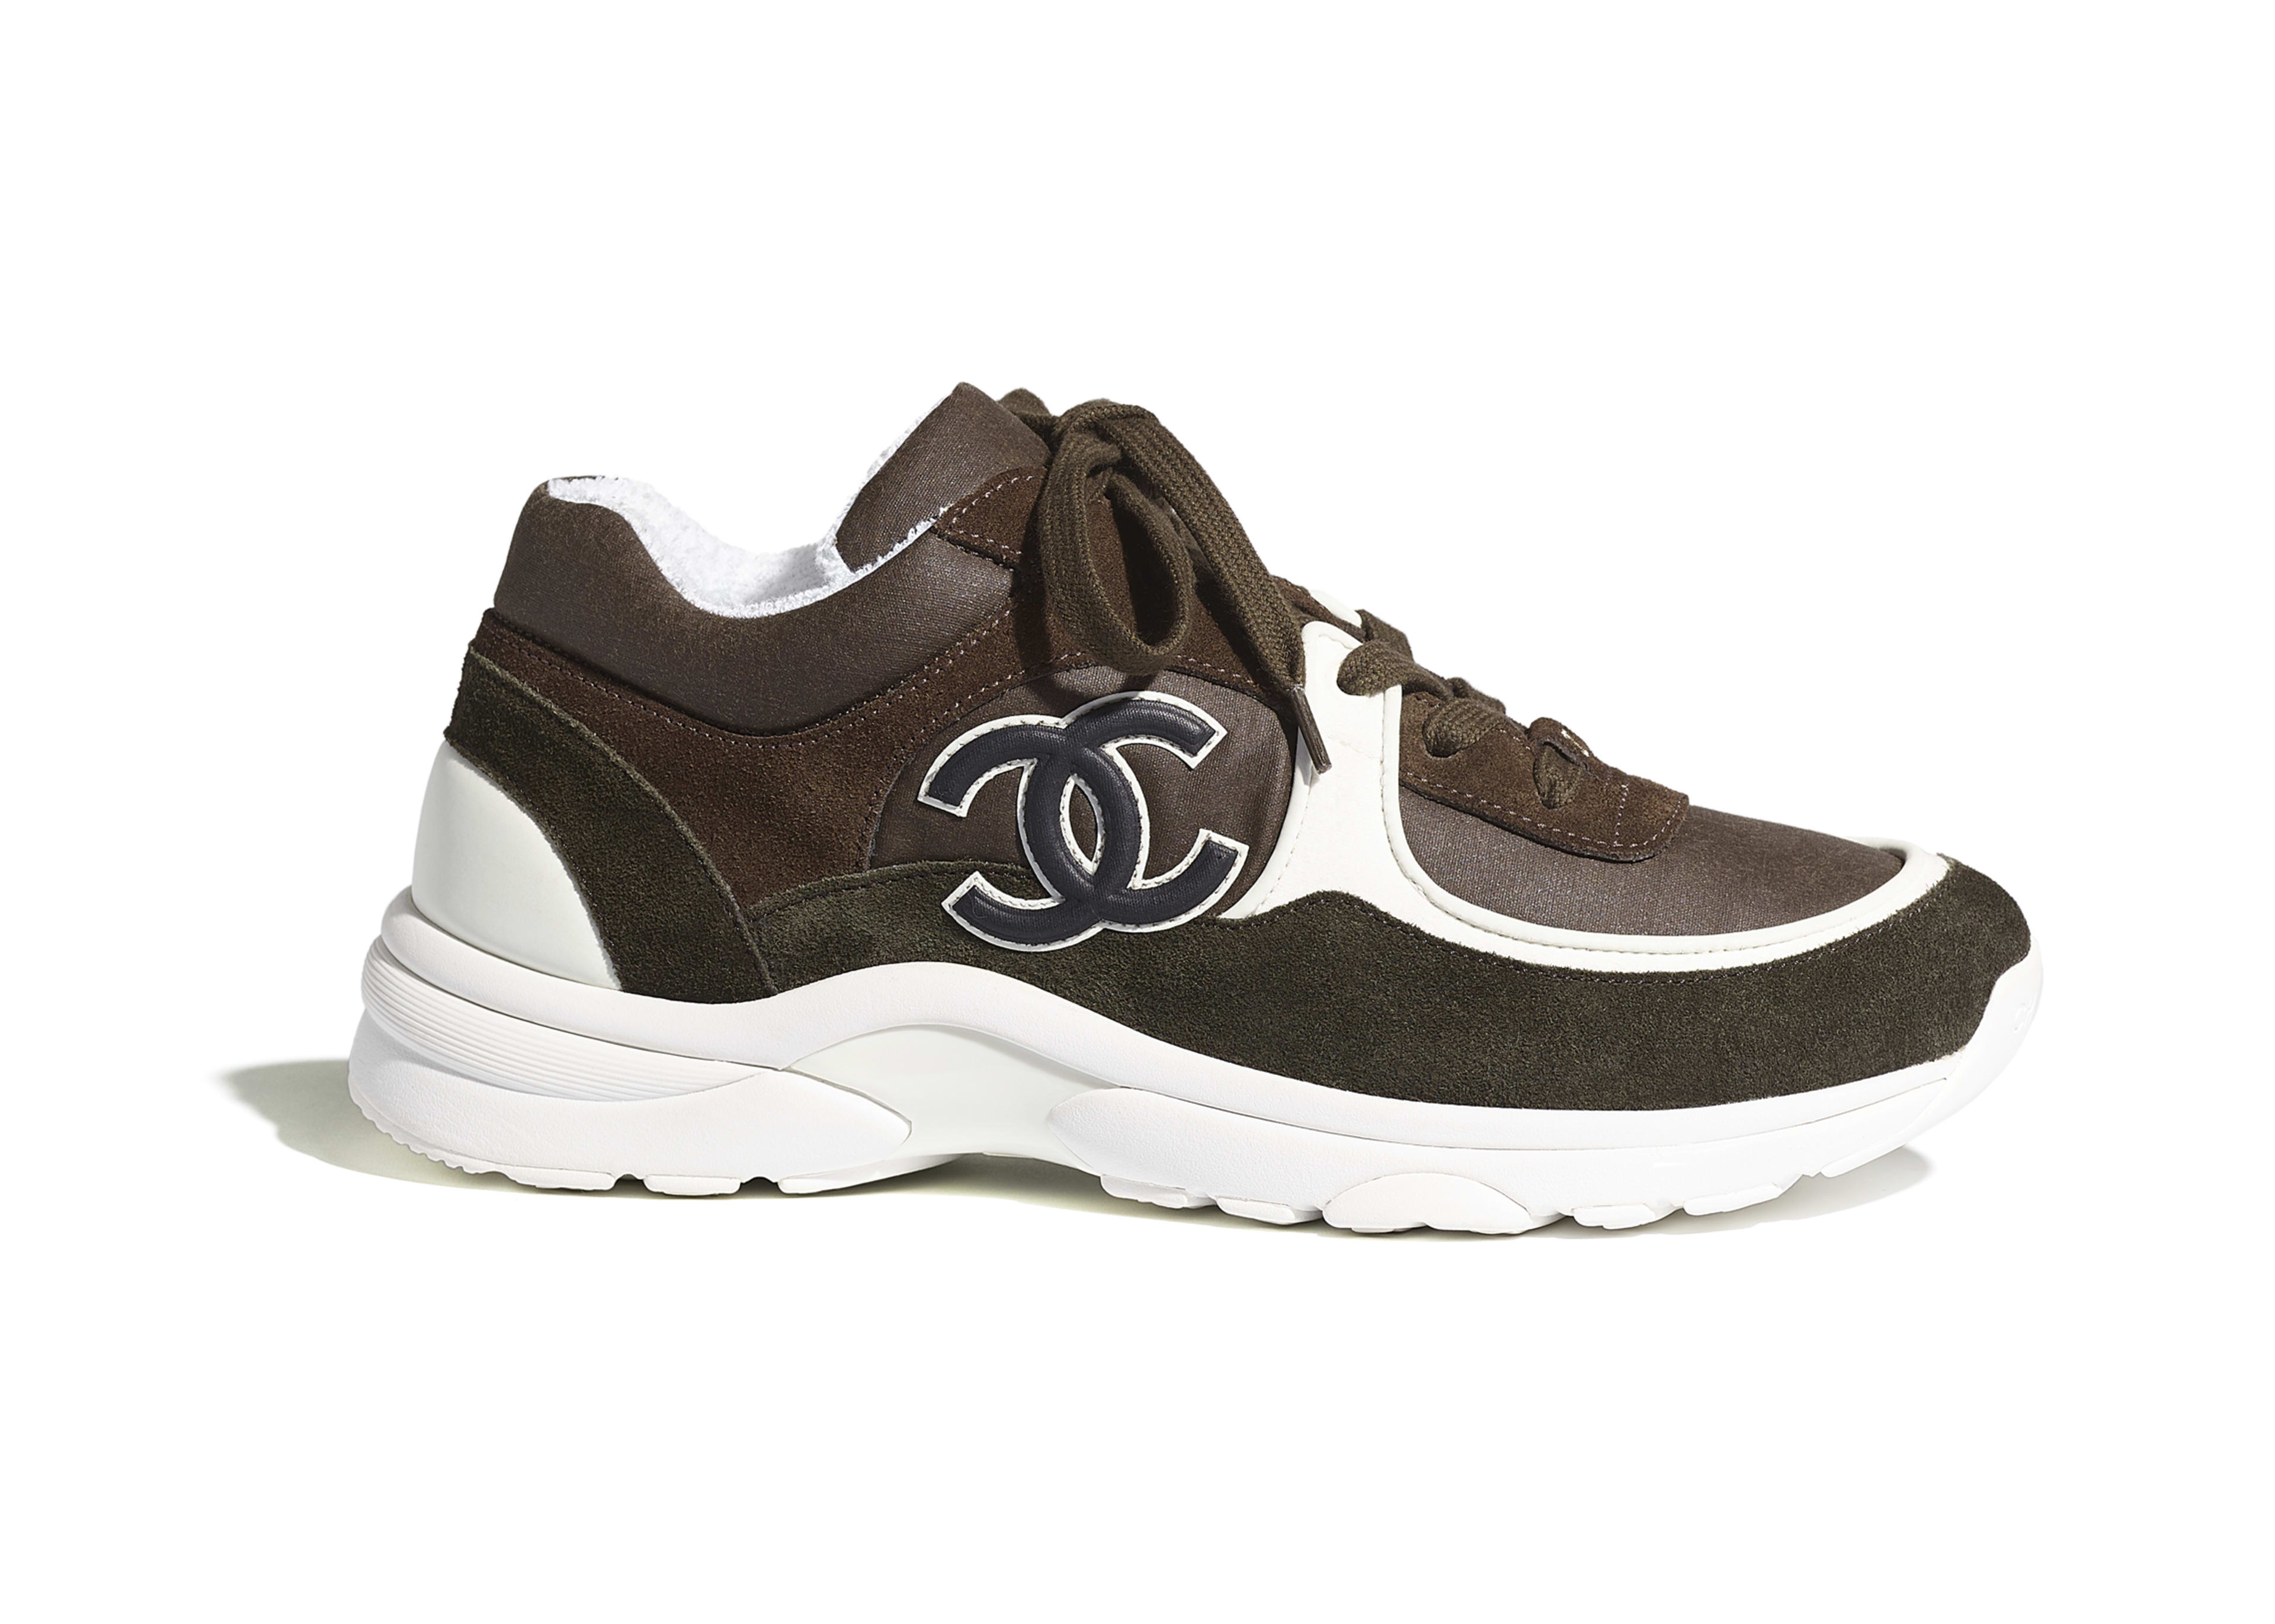 Chanel Low Top Trainer Brown Green - G34360 Y53658 0I501 - TW